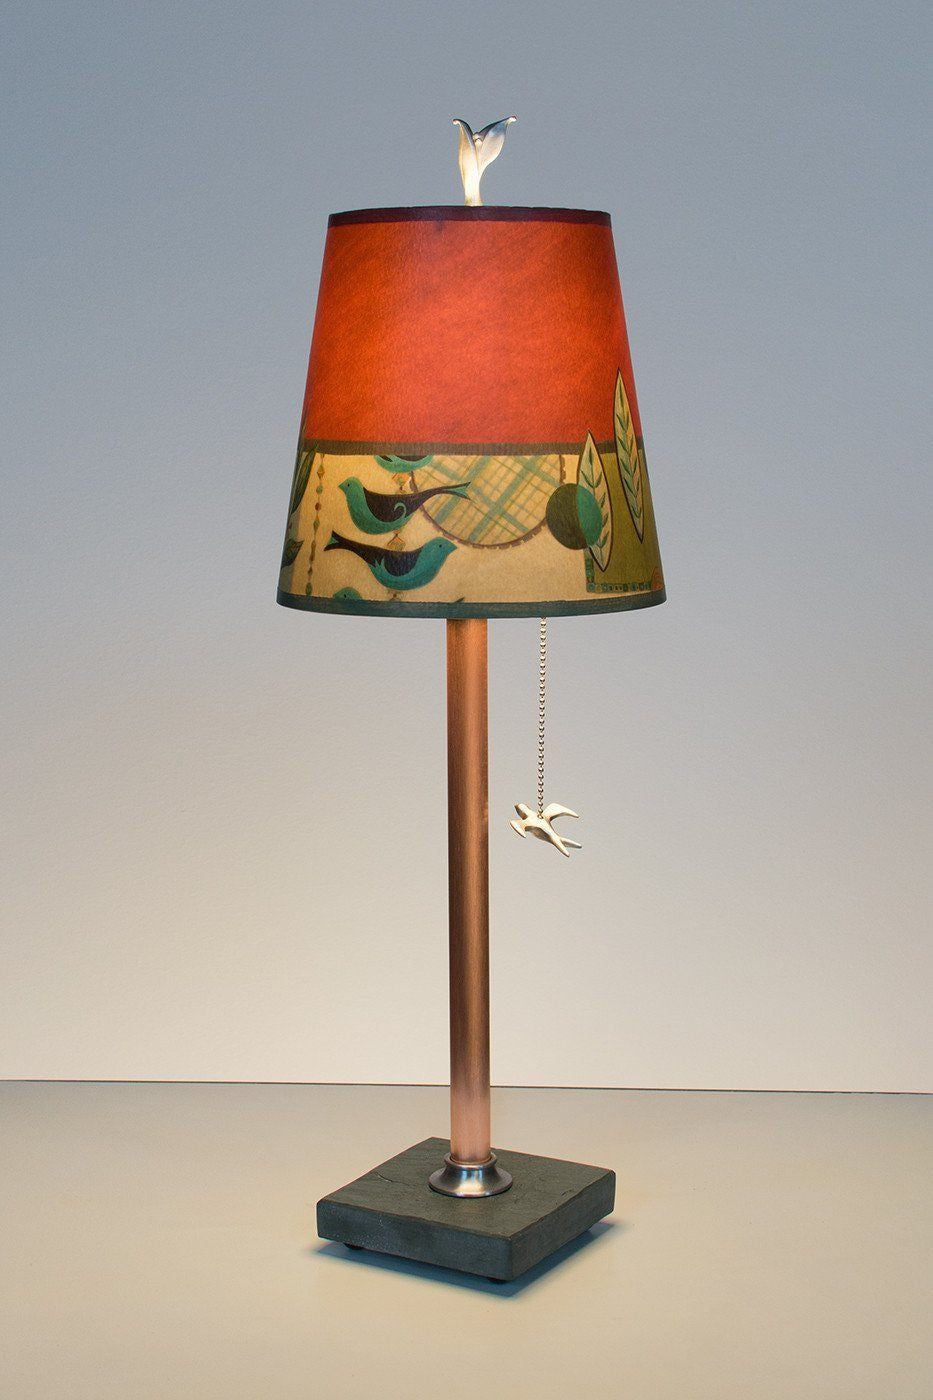 Janna Ugone & Co Table Lamps Copper Table Lamp with Small Drum Shade in New Capri